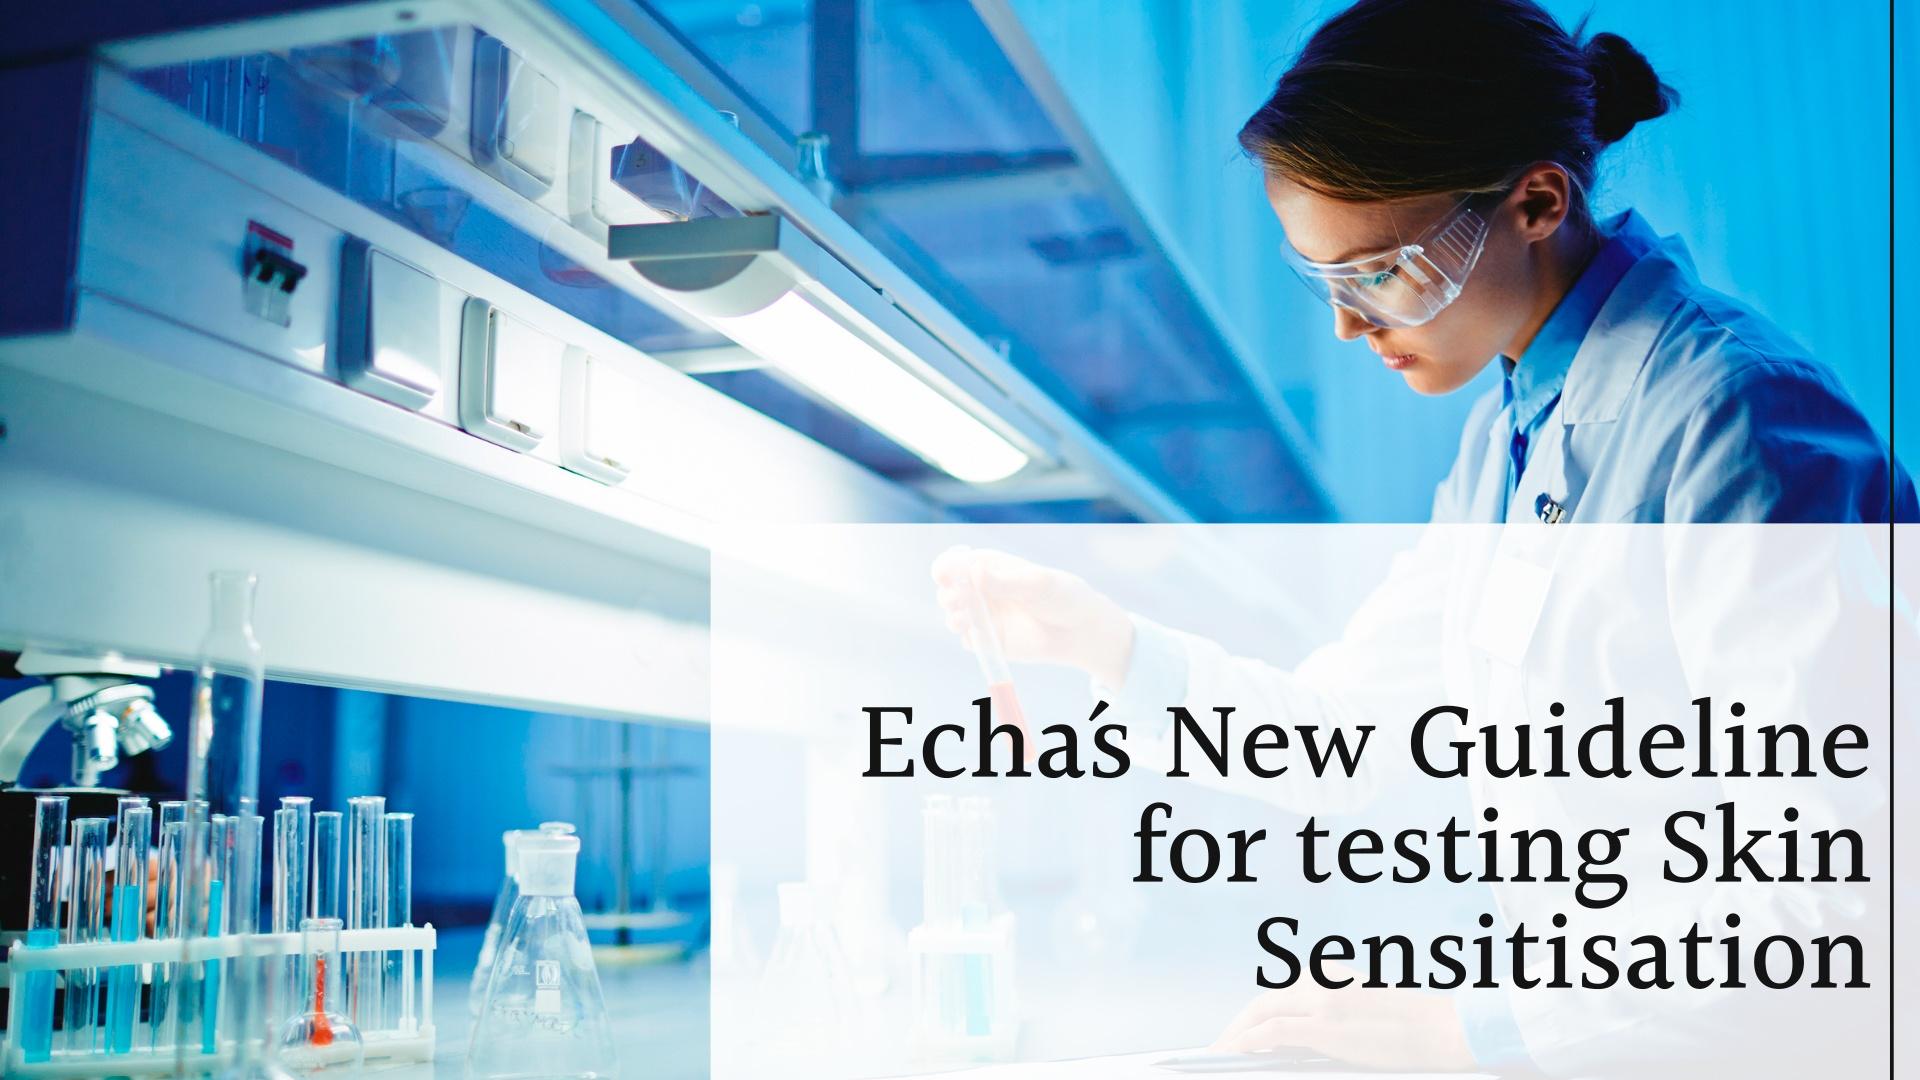 Echa´s new guideline to avoid animal testing and to reduce allergies caused by chemicals